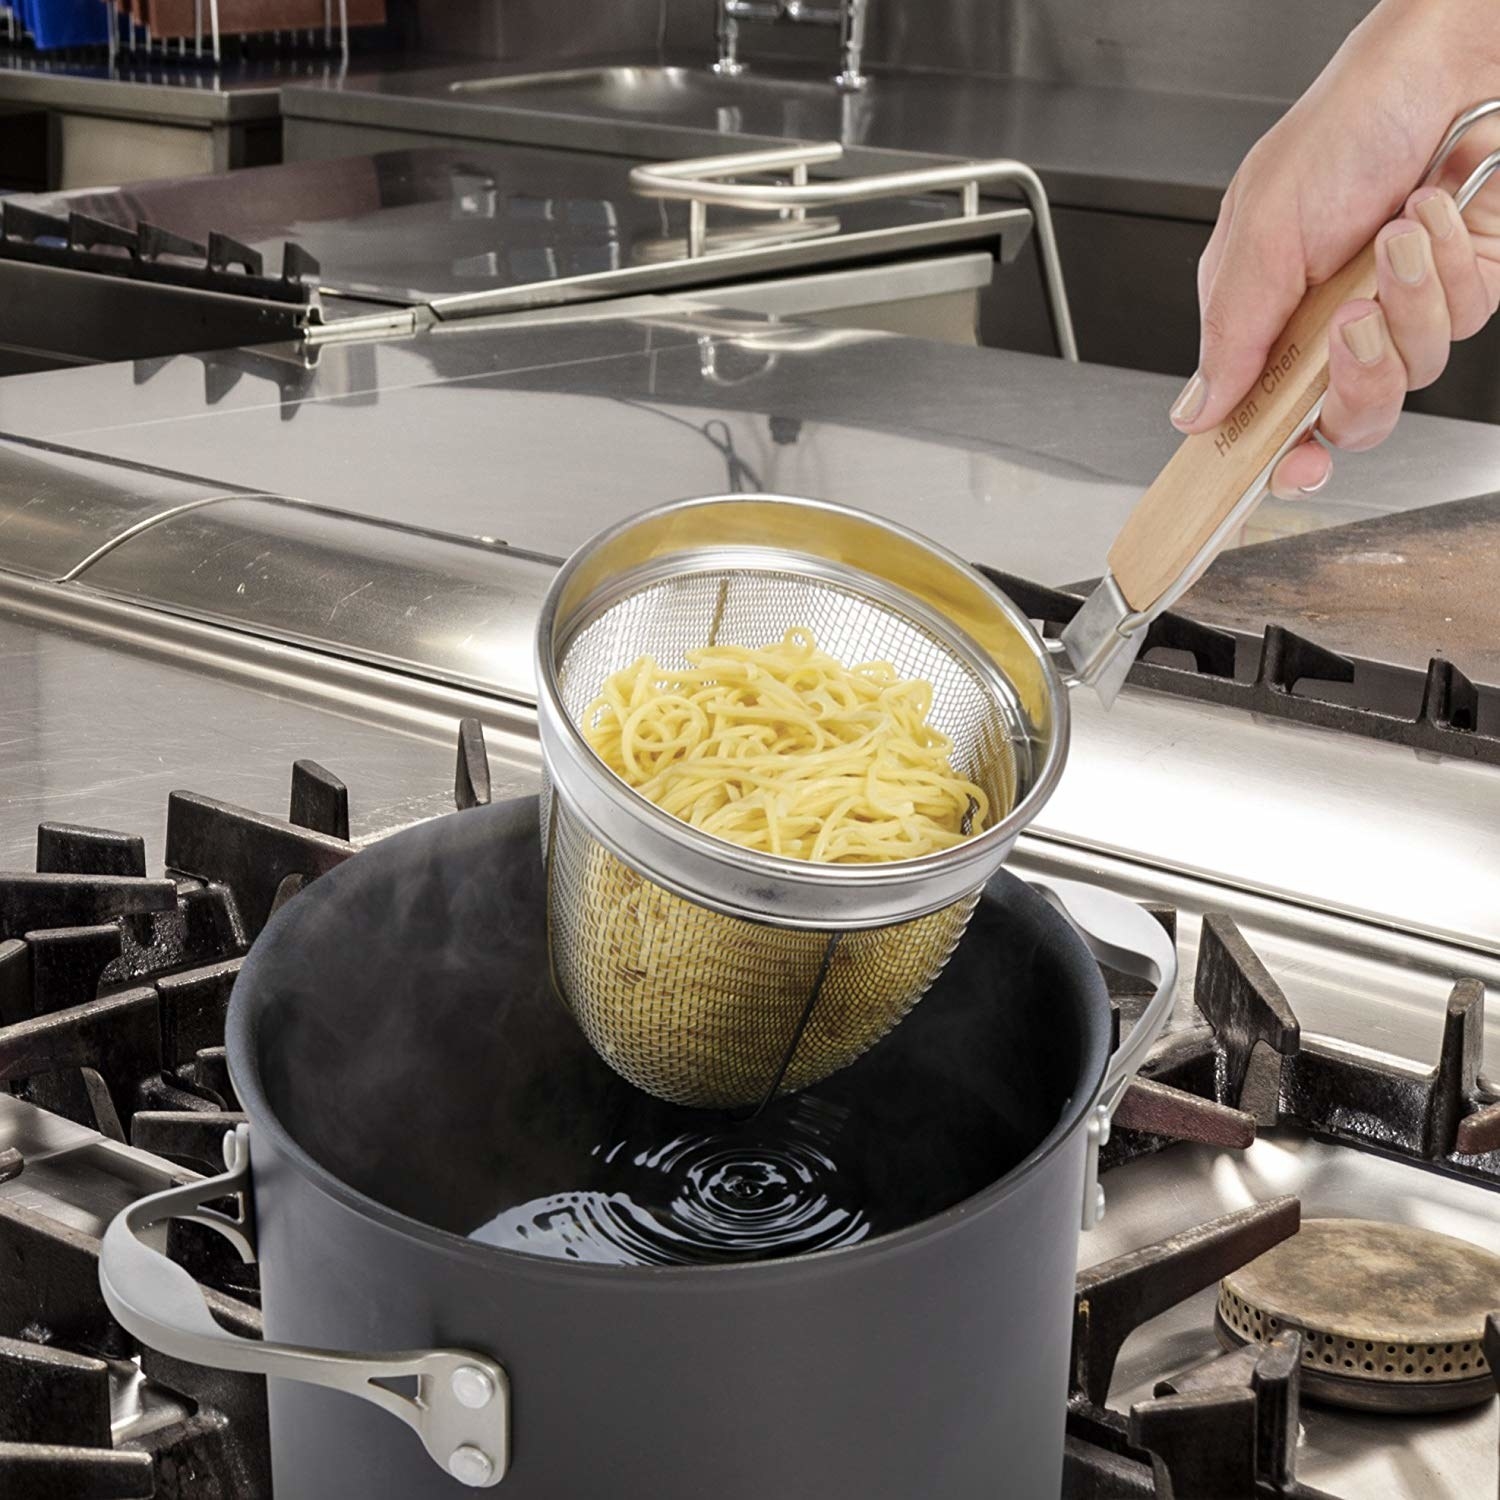 A person using the strainer to scoop up pasta